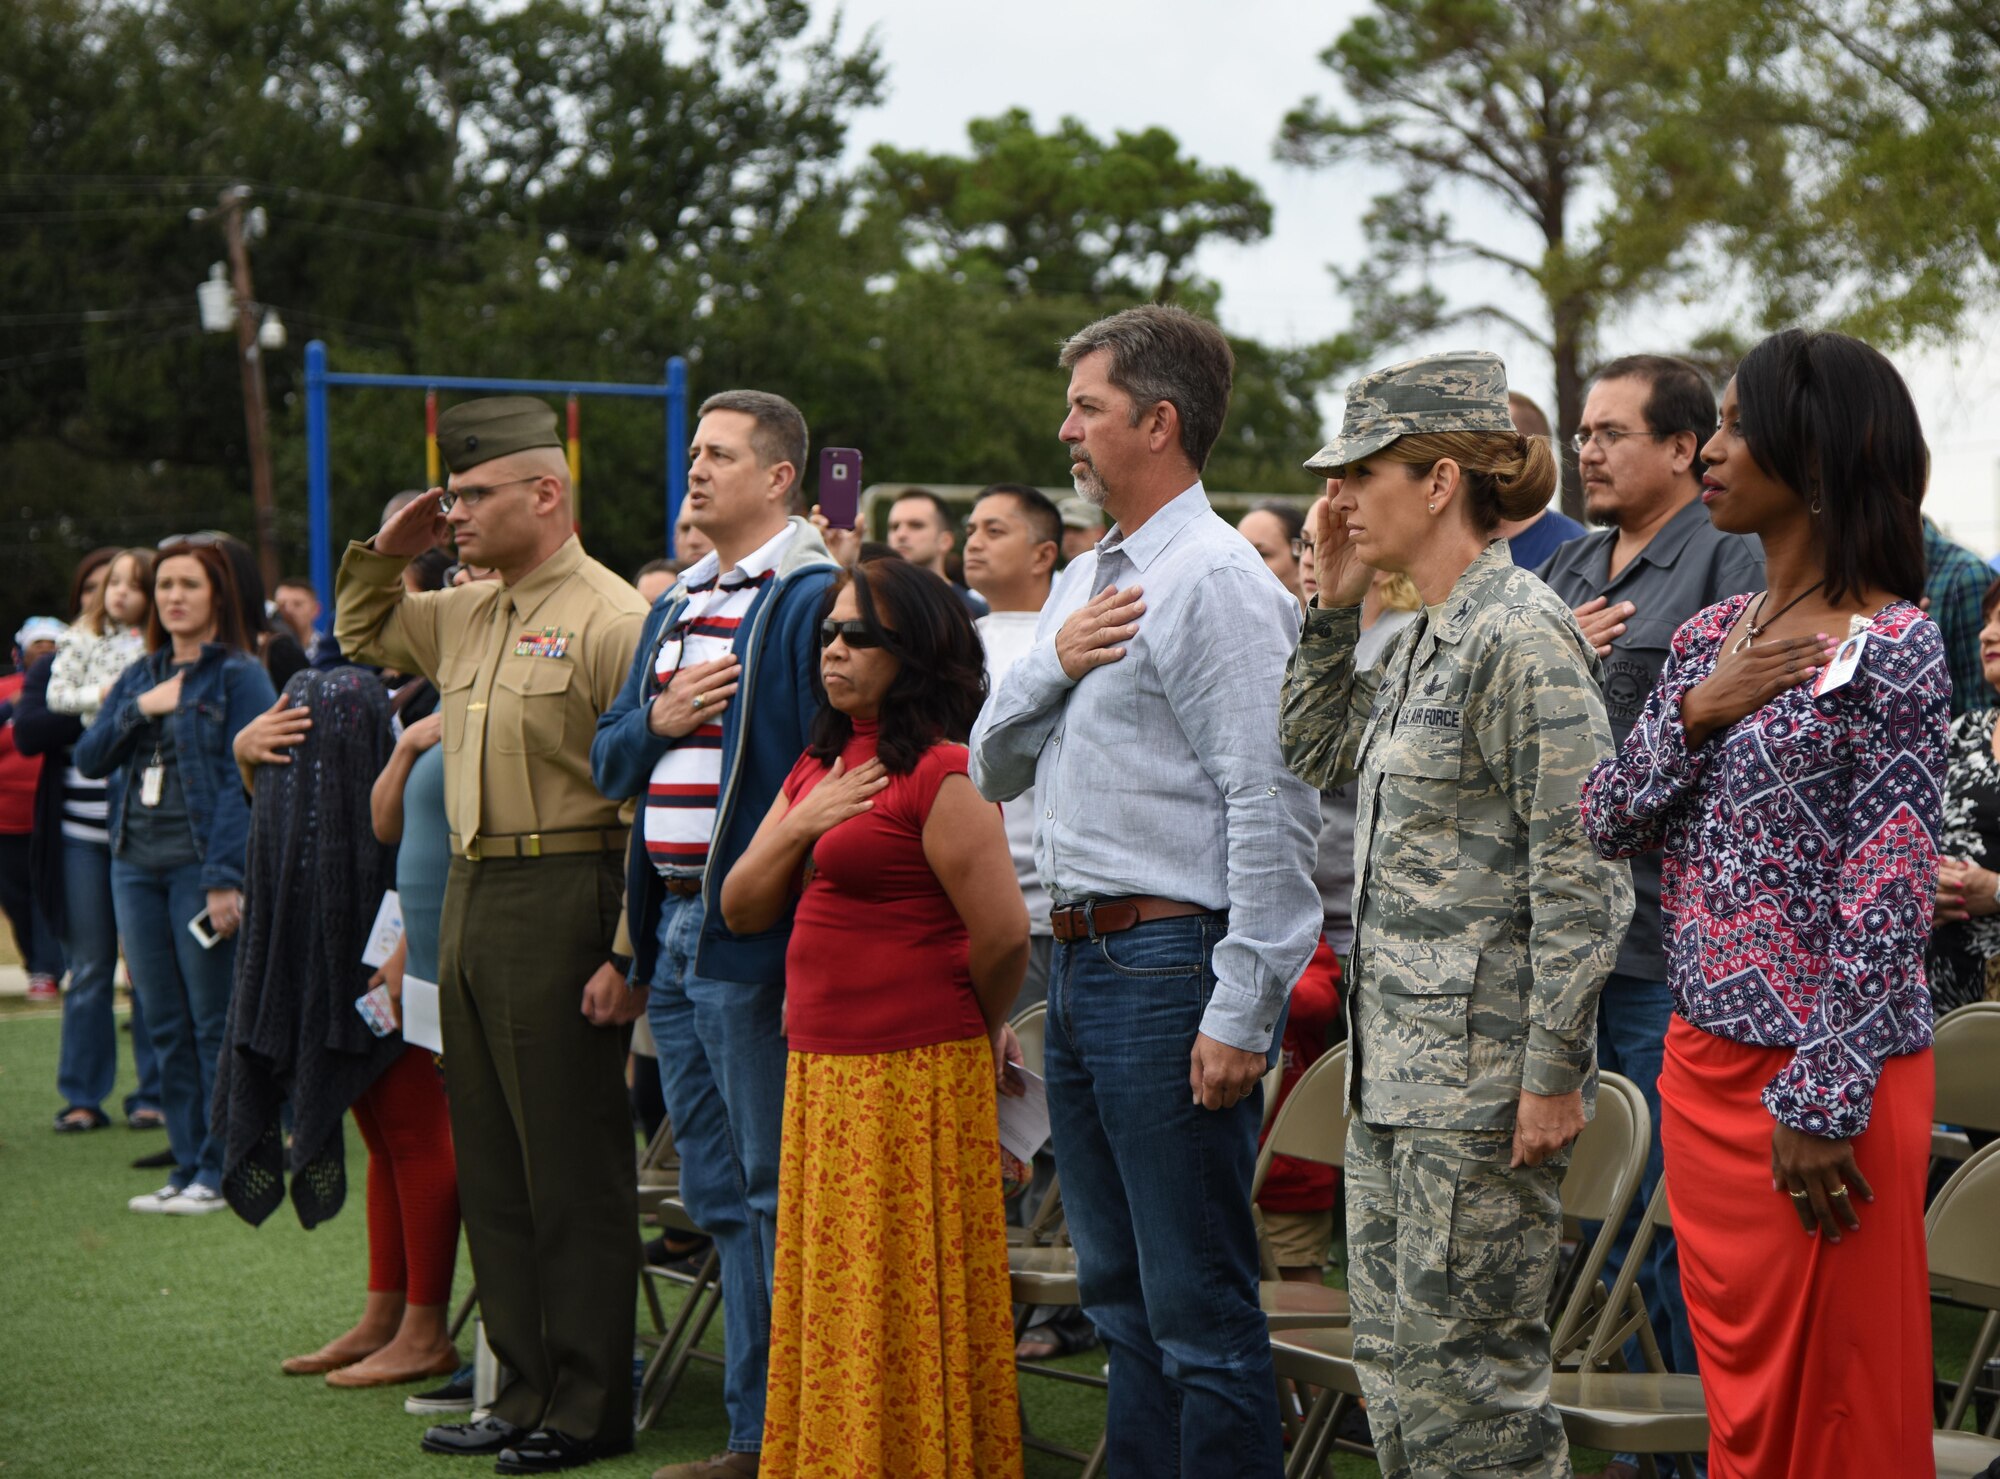 Col. Michele Edmondson, 81st Training Wing commander, and fellow audience members honor the flag during a Jeff Davis Elementary School Veterans Day Celebration Nov. 11, 2016, in Biloxi, Miss. During the event, students also sang several patriotic songs. Keesler Air Force Base Honor Guard Airmen also participated in the event. (U.S. Air Force photo by Kemberly Groue/Released)